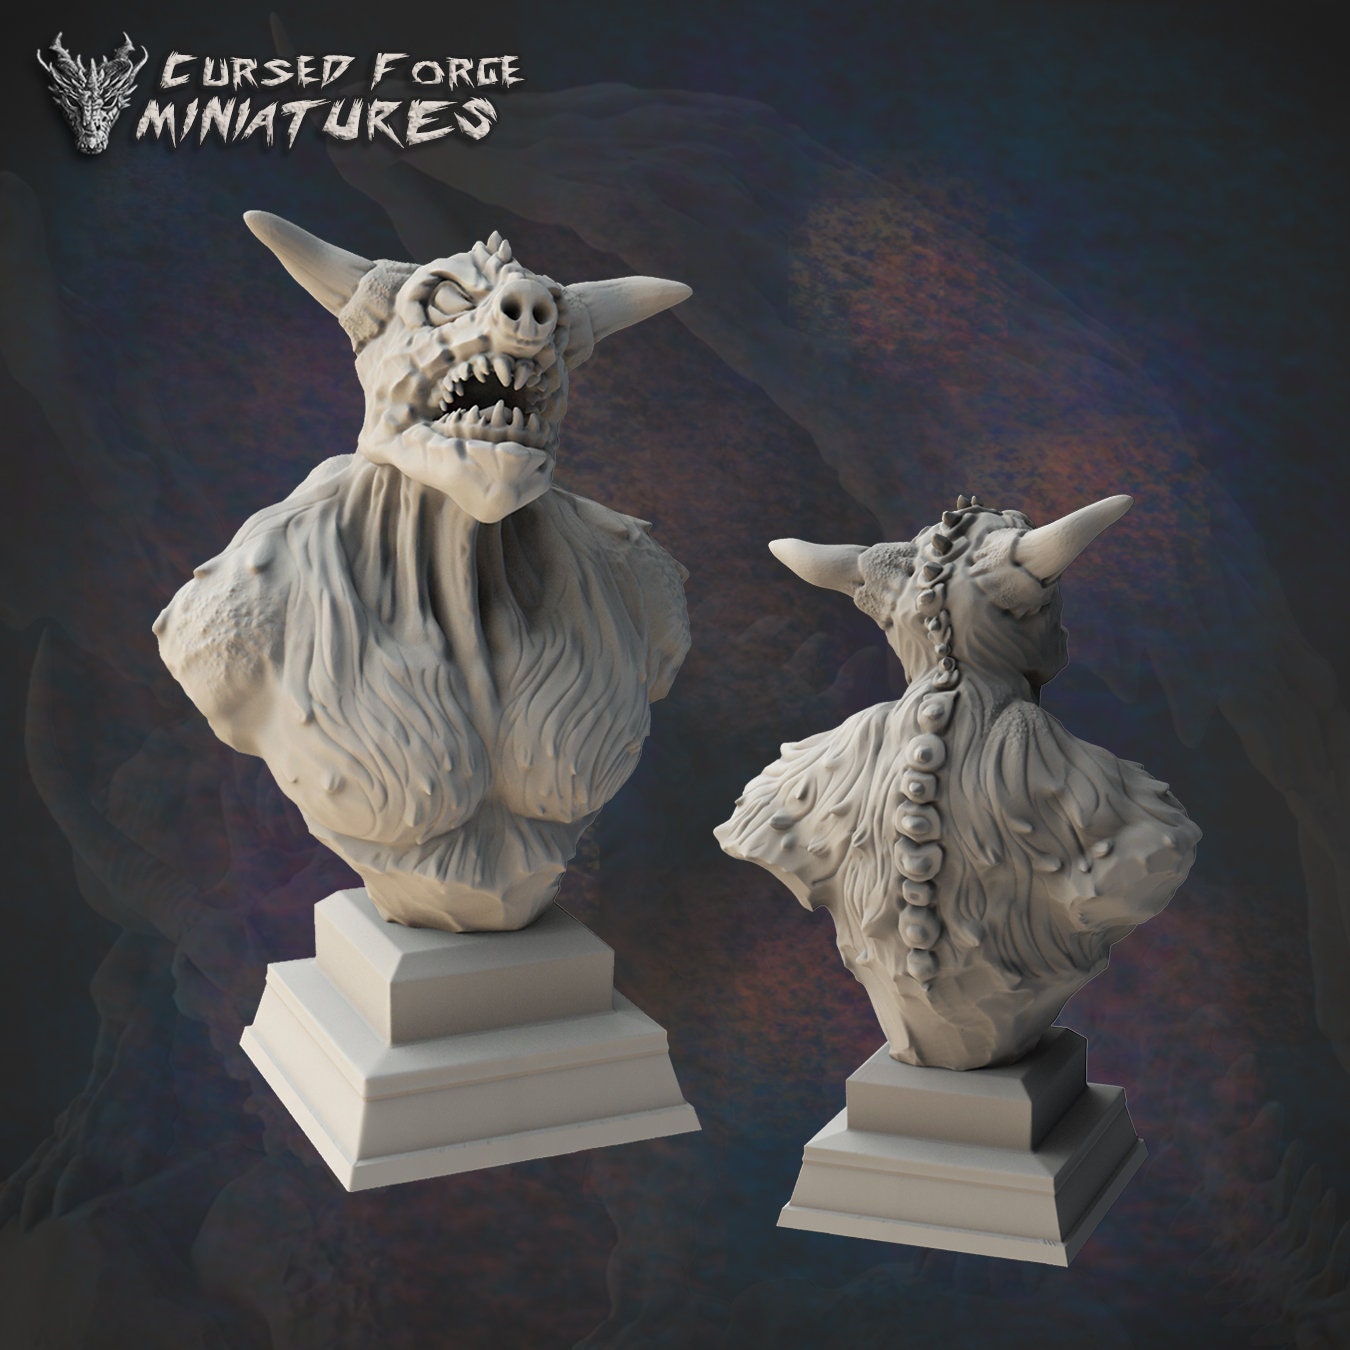 DRETCH BUST, by Cursed Forge Miniatures // 3D Print on Demand / D&D / Pathfinder / RPG